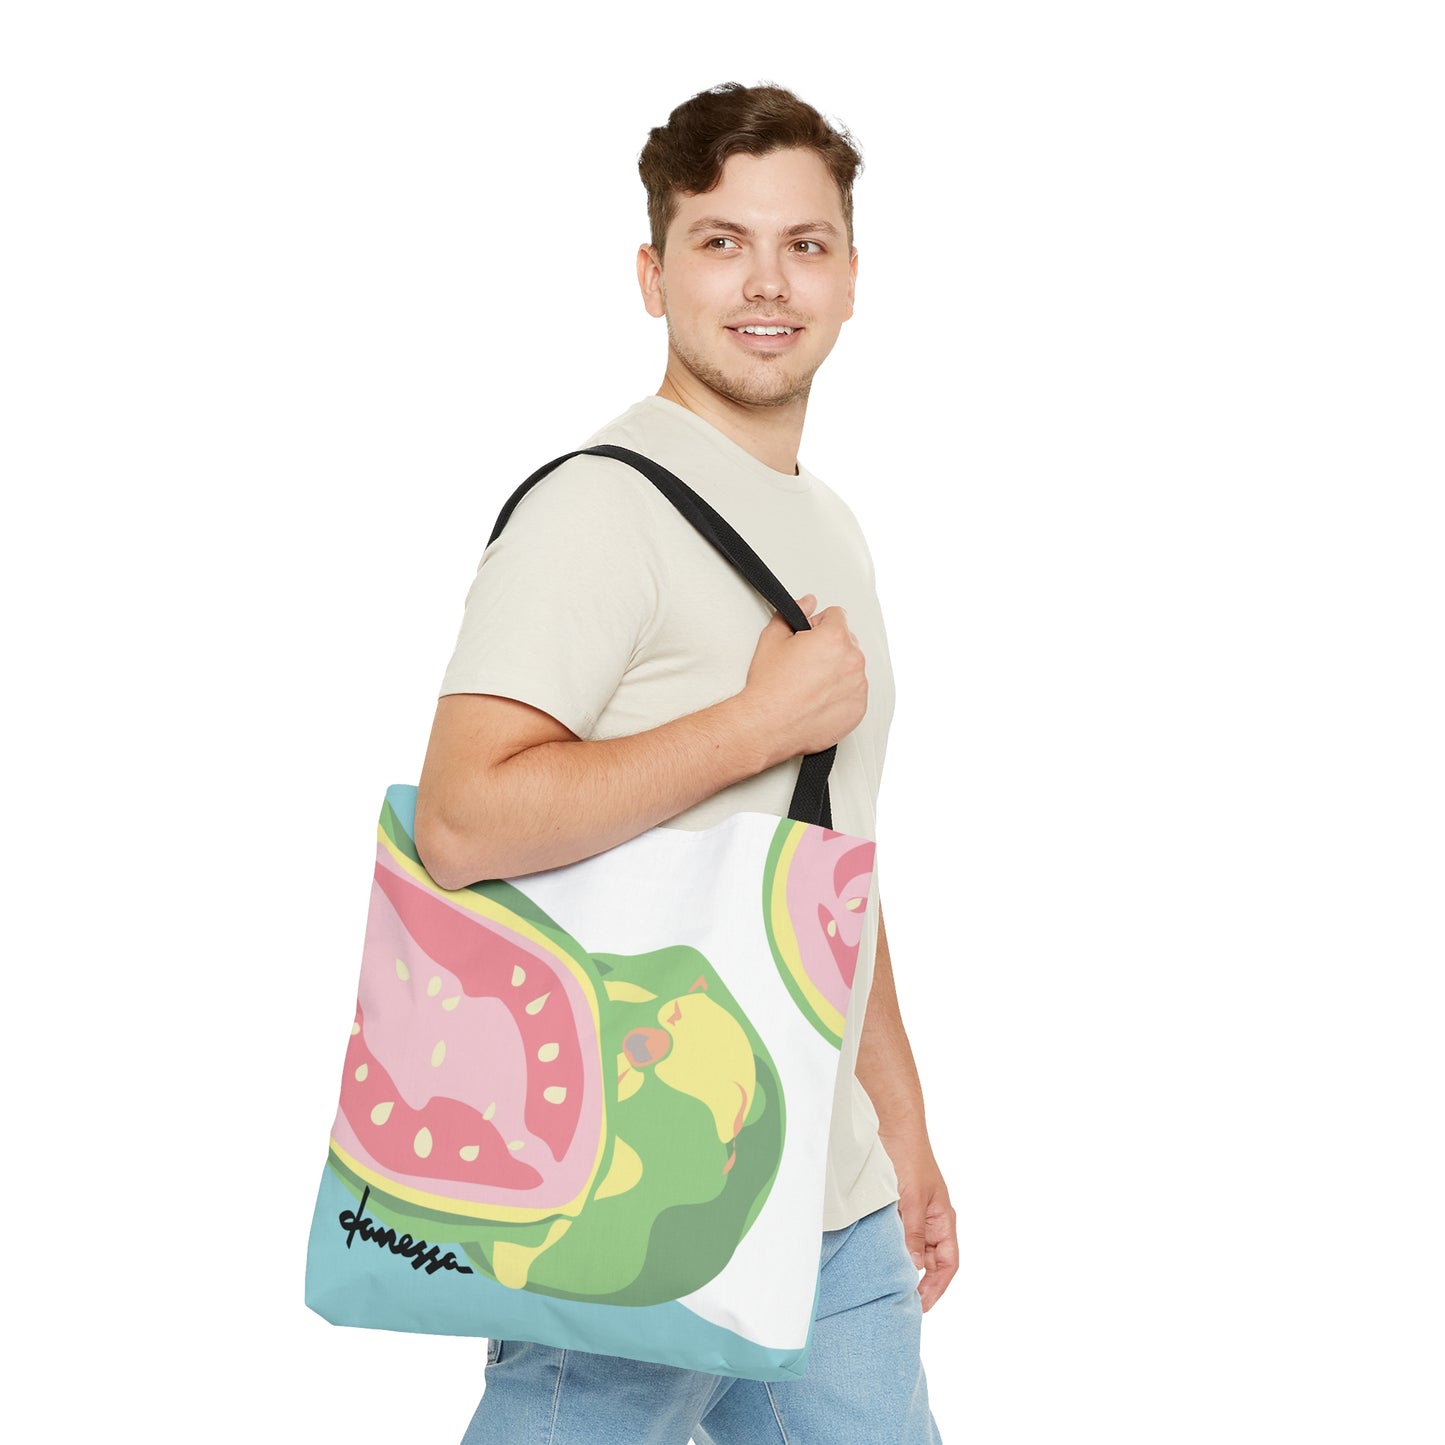 Guava Nice Day Tote Bag